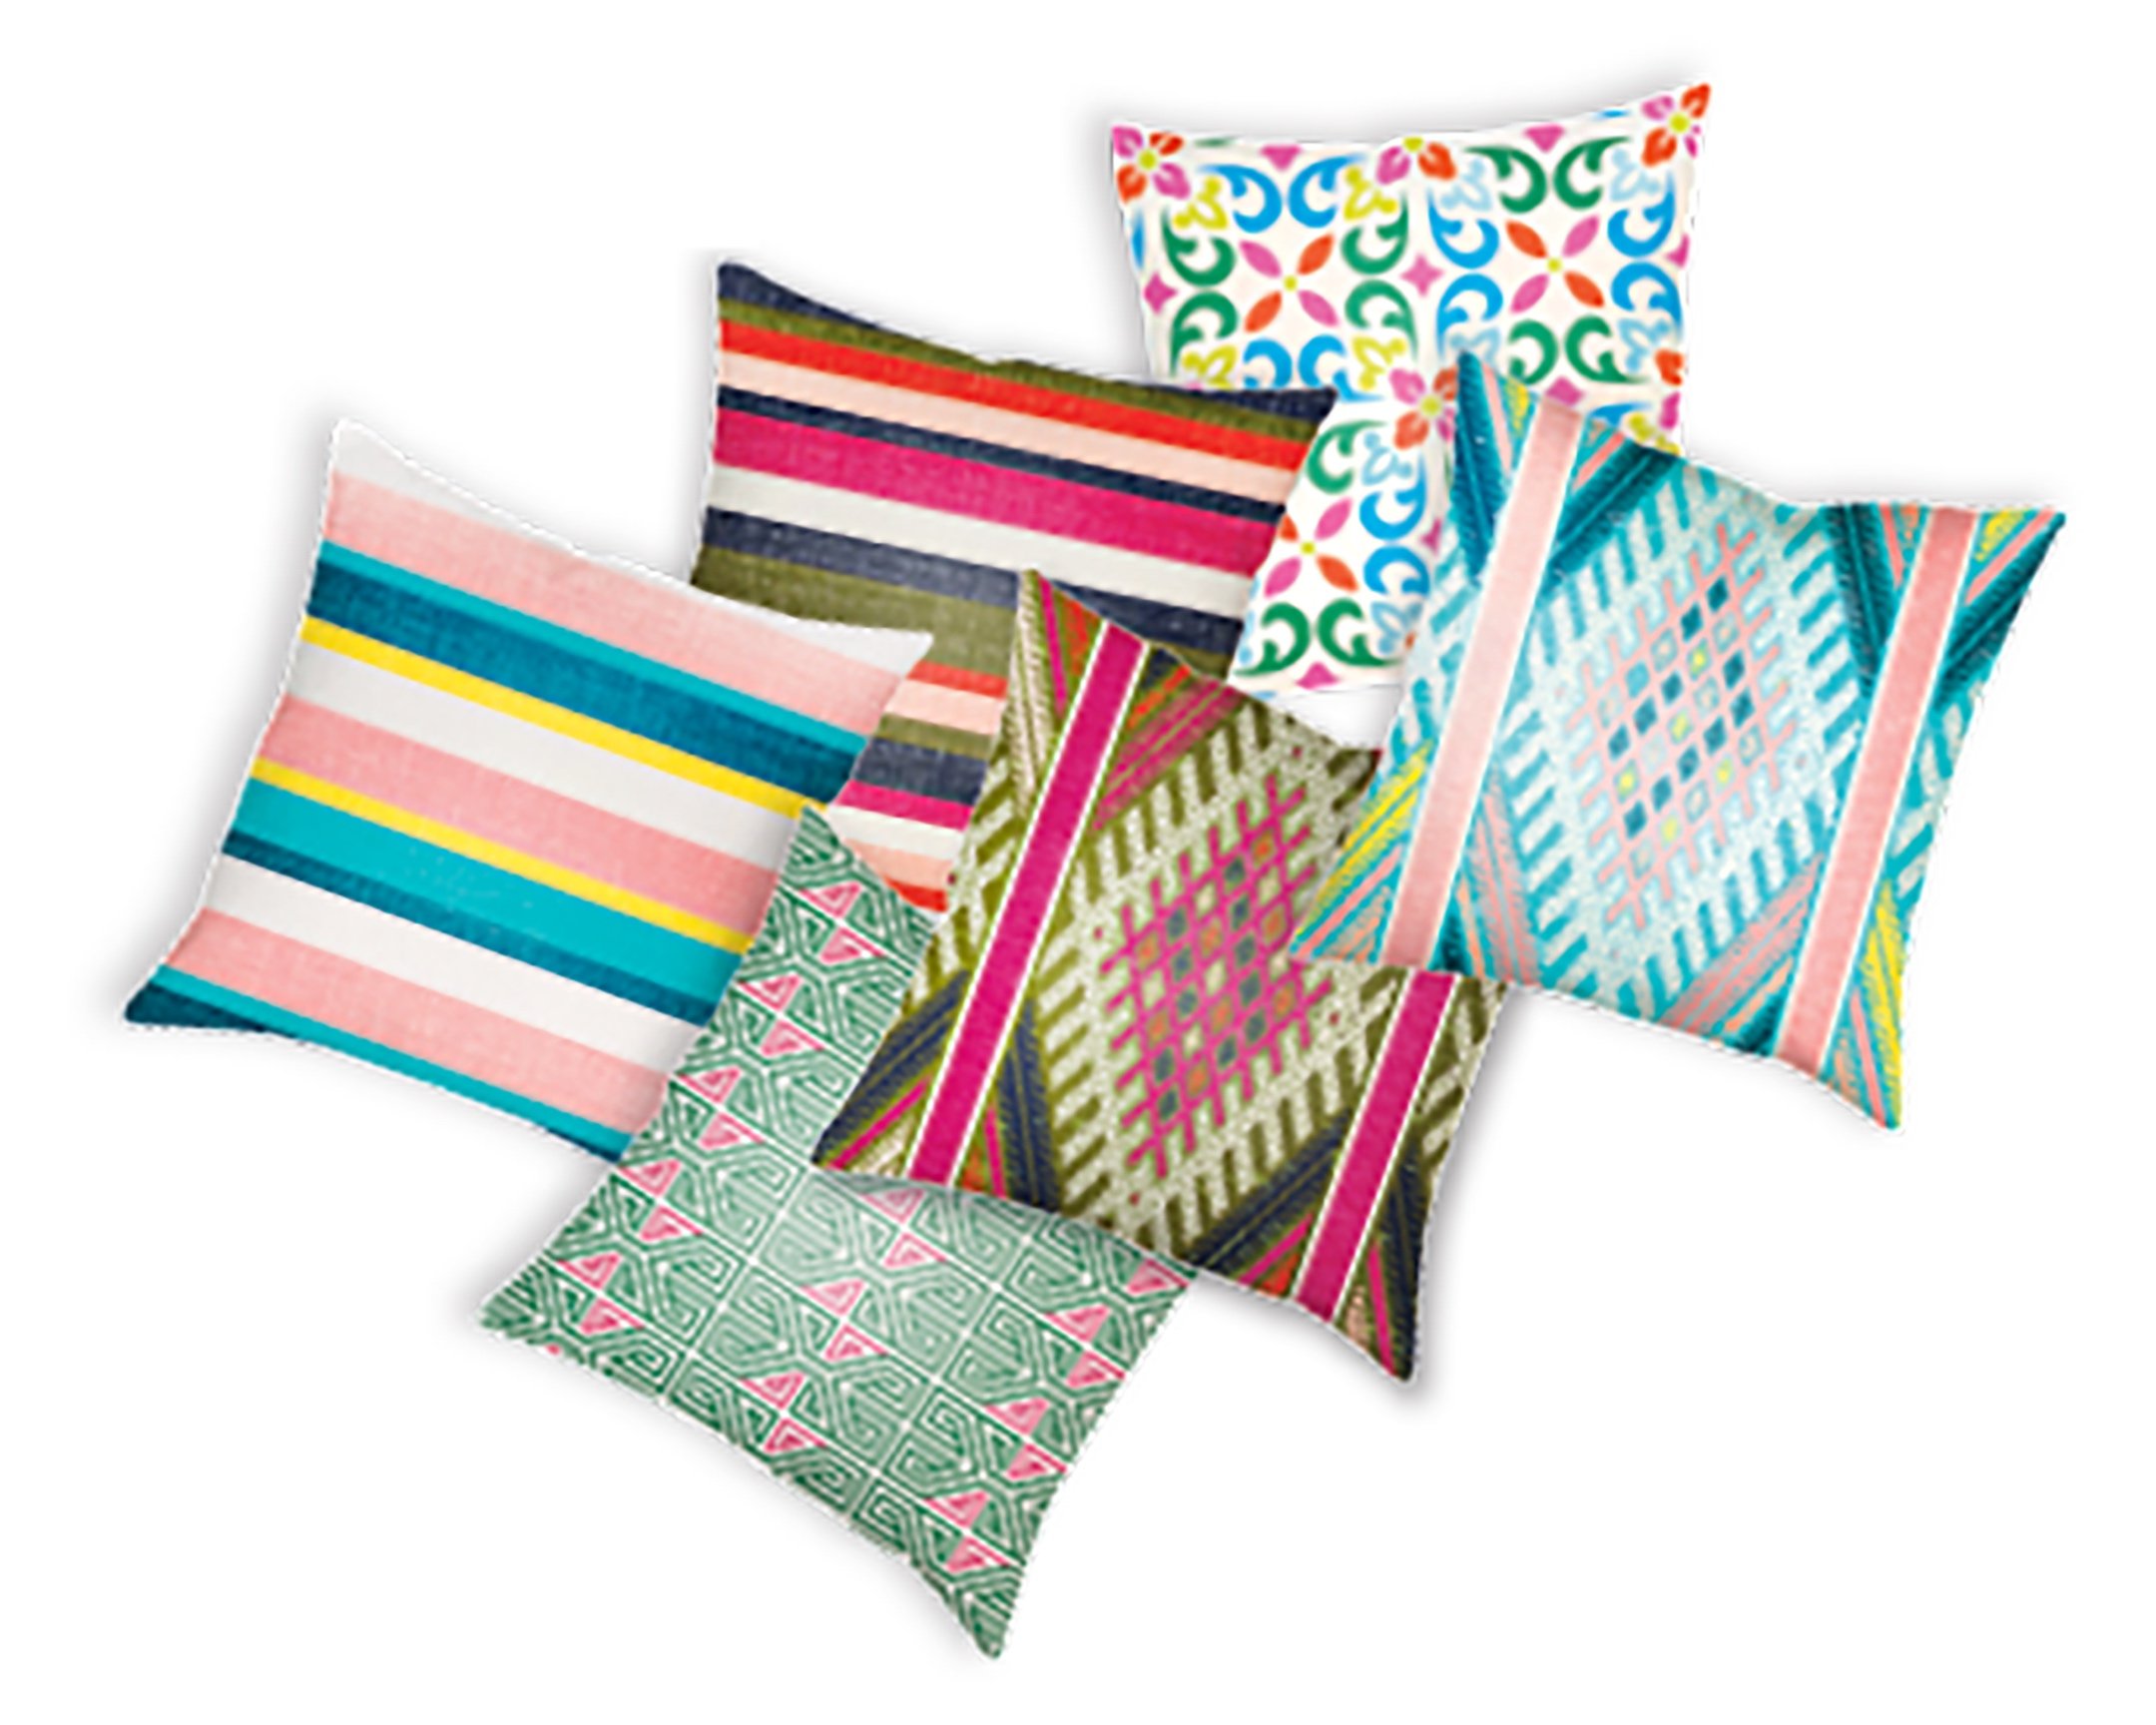  A multitude of colours and patterns to suit your mood, style and the seasons. Throw these  Lolita  cushions indoors or outdoors to add delight   to any area.  www.living.ky  